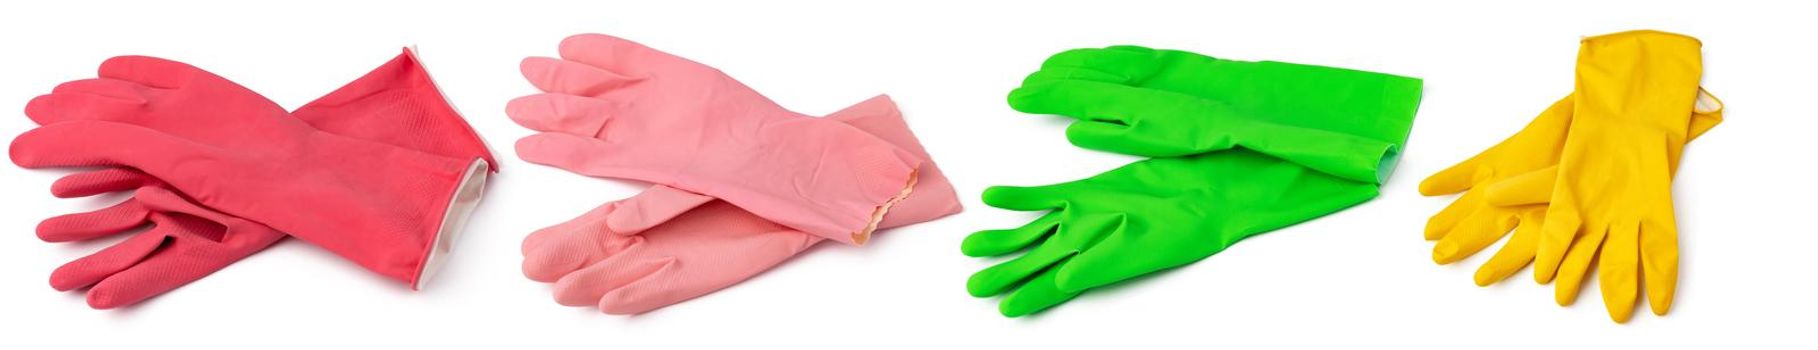 Coloured rubber gloves isolated on white background, close up